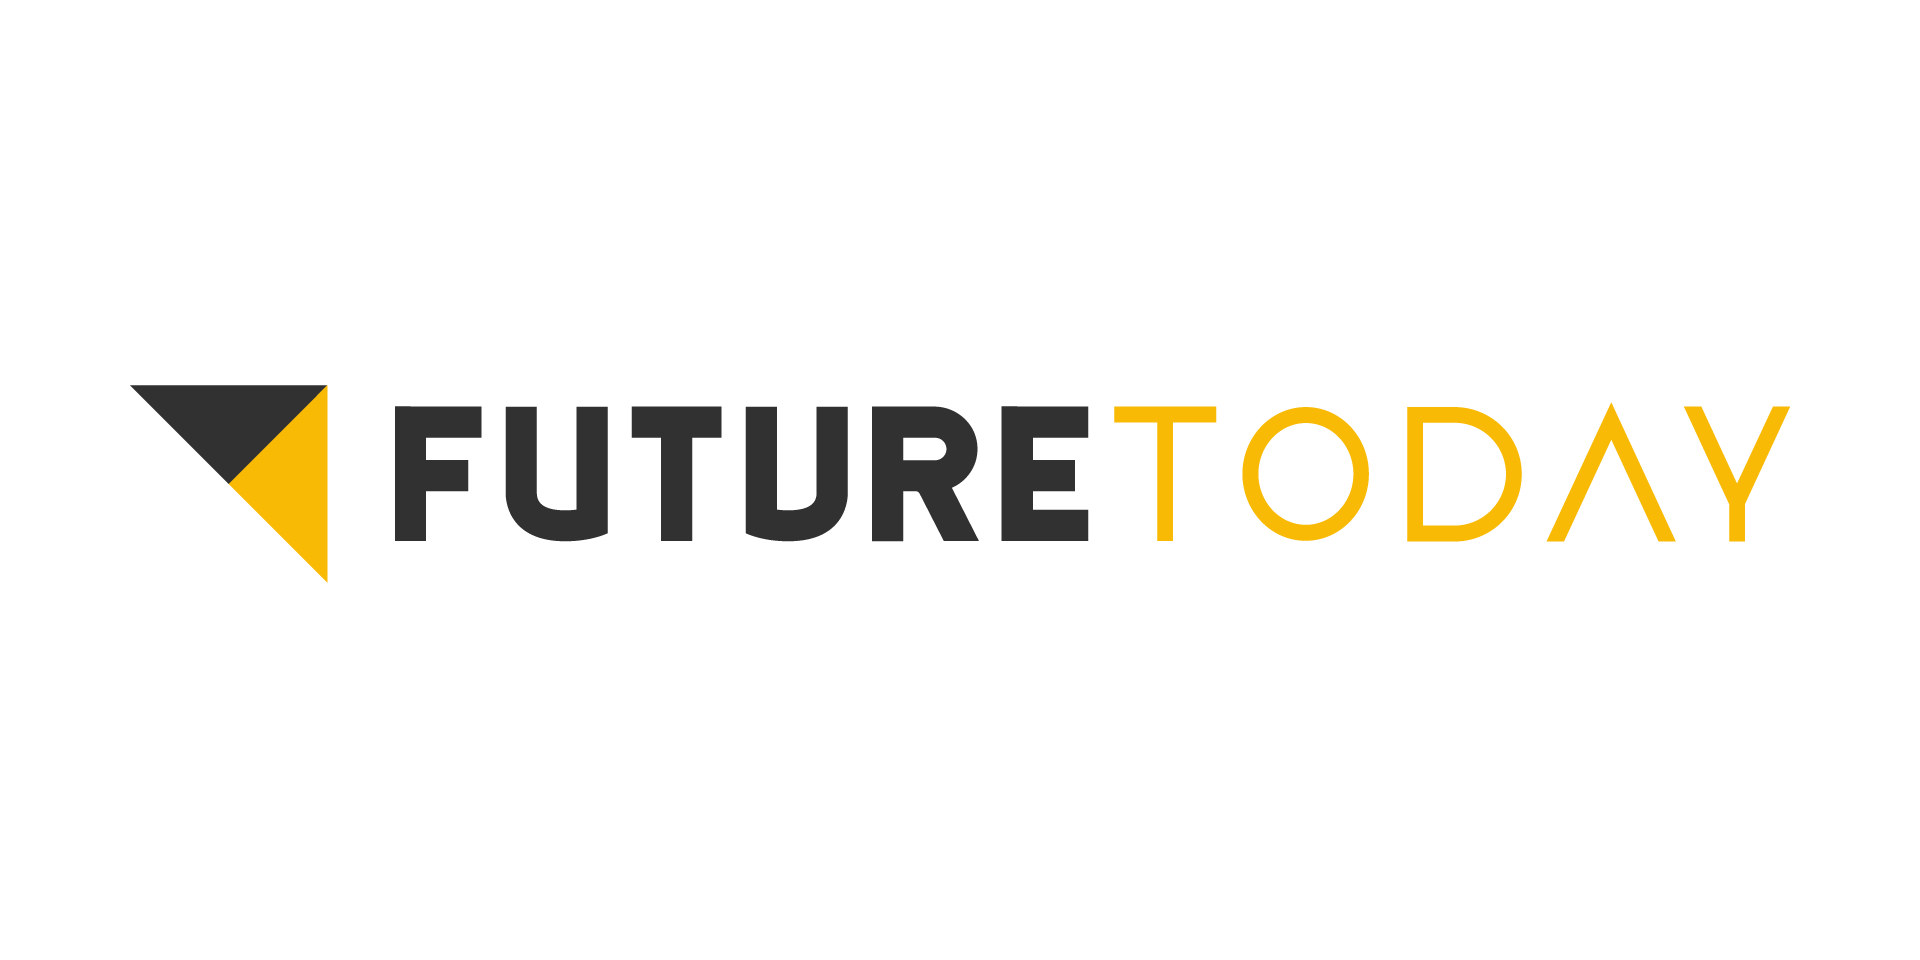 YouTube Sensation Brat TV Partners With Future Today to Launch New AVOD Channel Business Wire